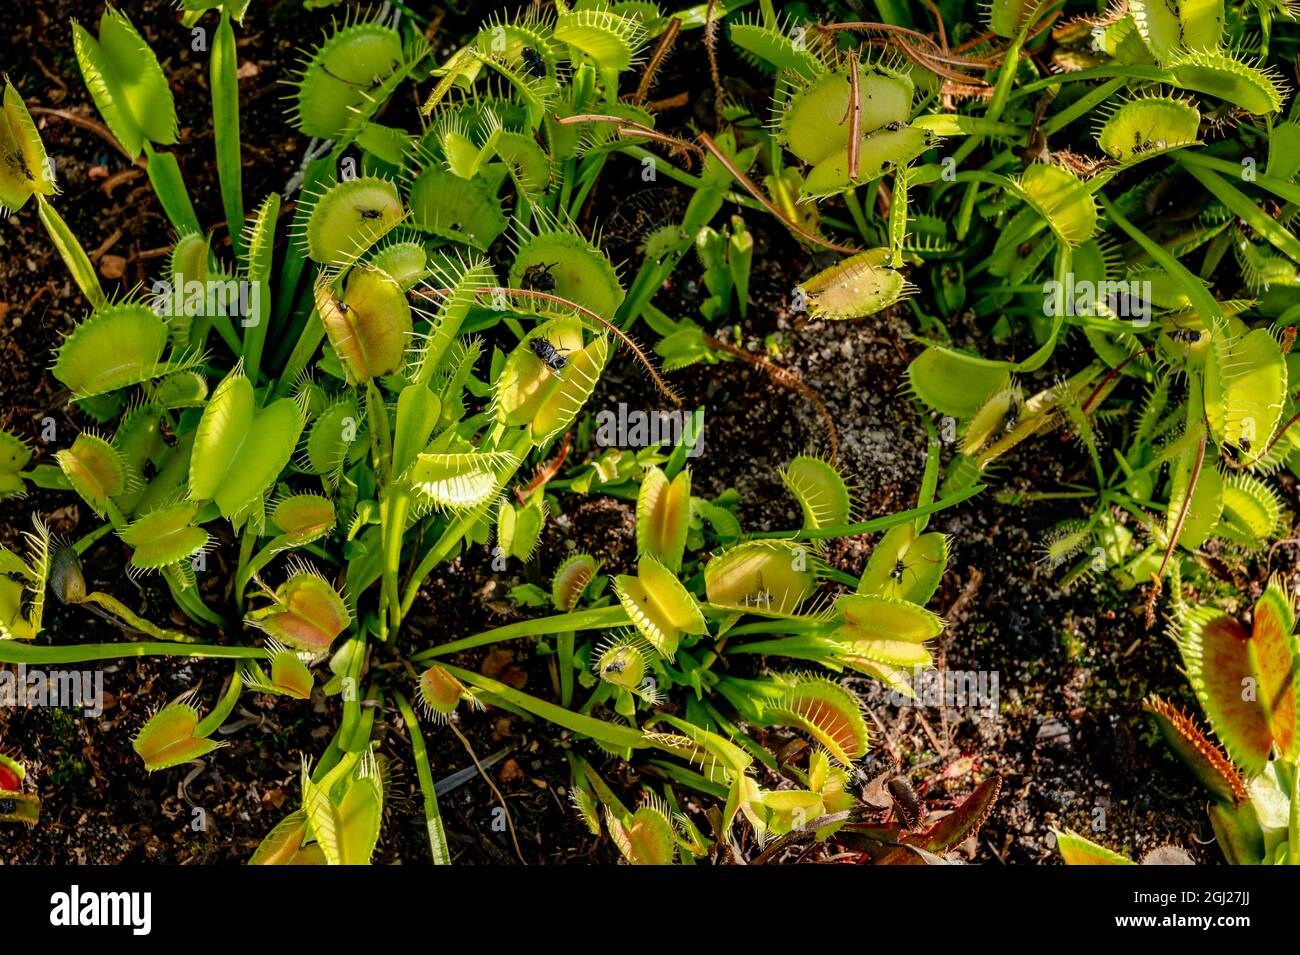 Venus flytrap in garden bed. Dionaea muscipula. Exotic tropical plant. Beauty in nature. Stock Photo